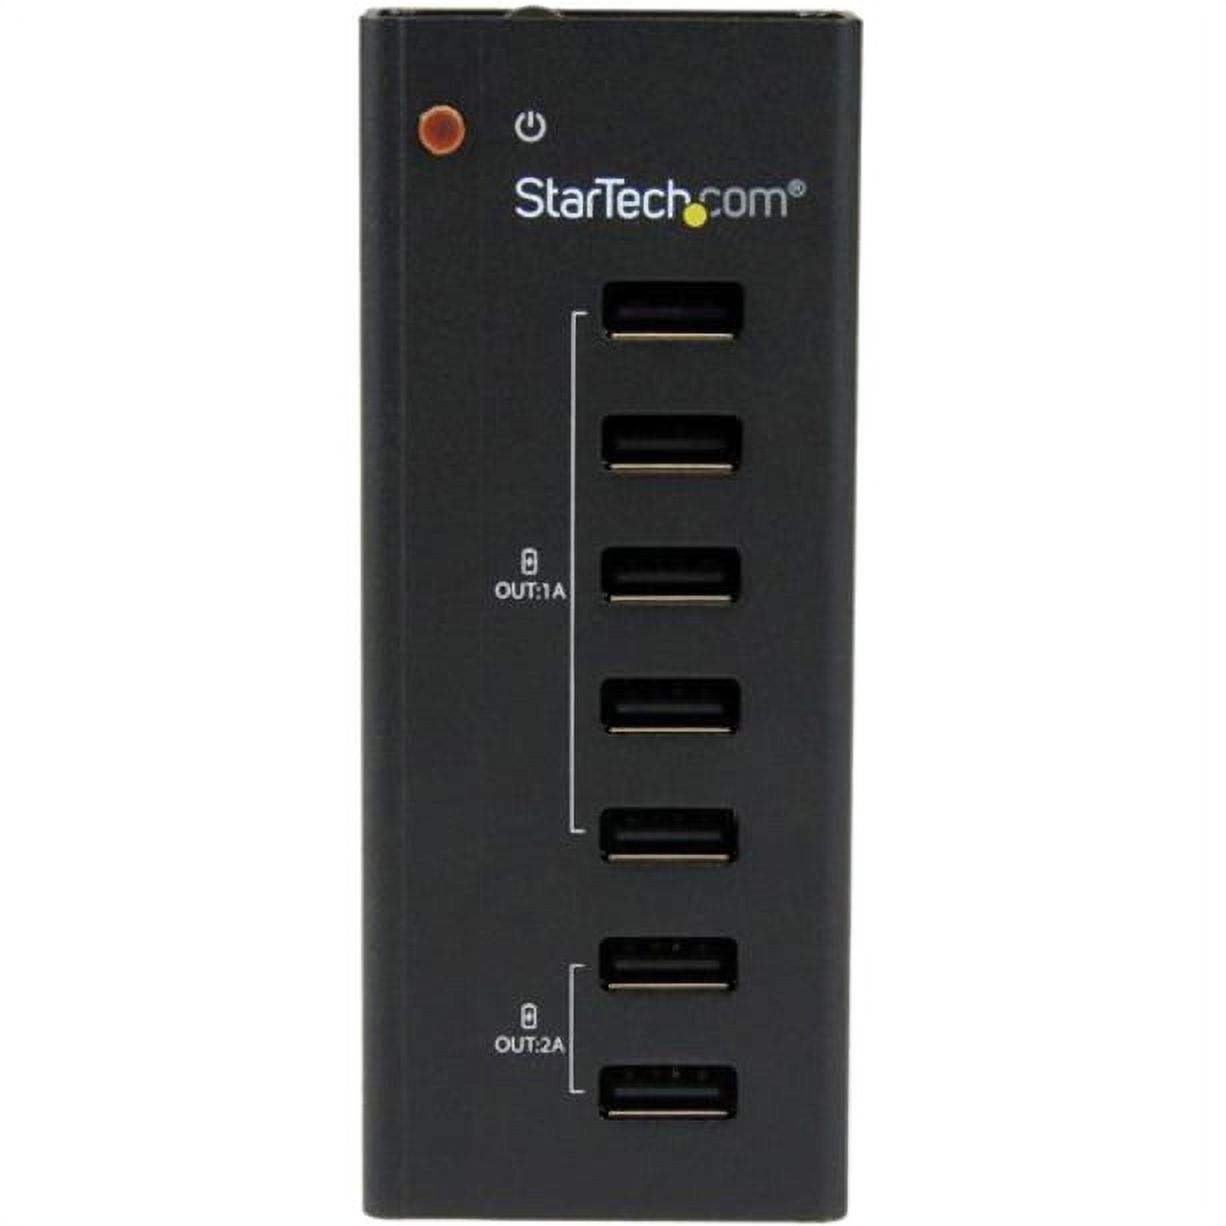 StarTech.com 7 Port Dedicated USB Charging Station (5 x 1A, 2 x 2A), Standalone Multi-Port USB Charger - image 2 of 7